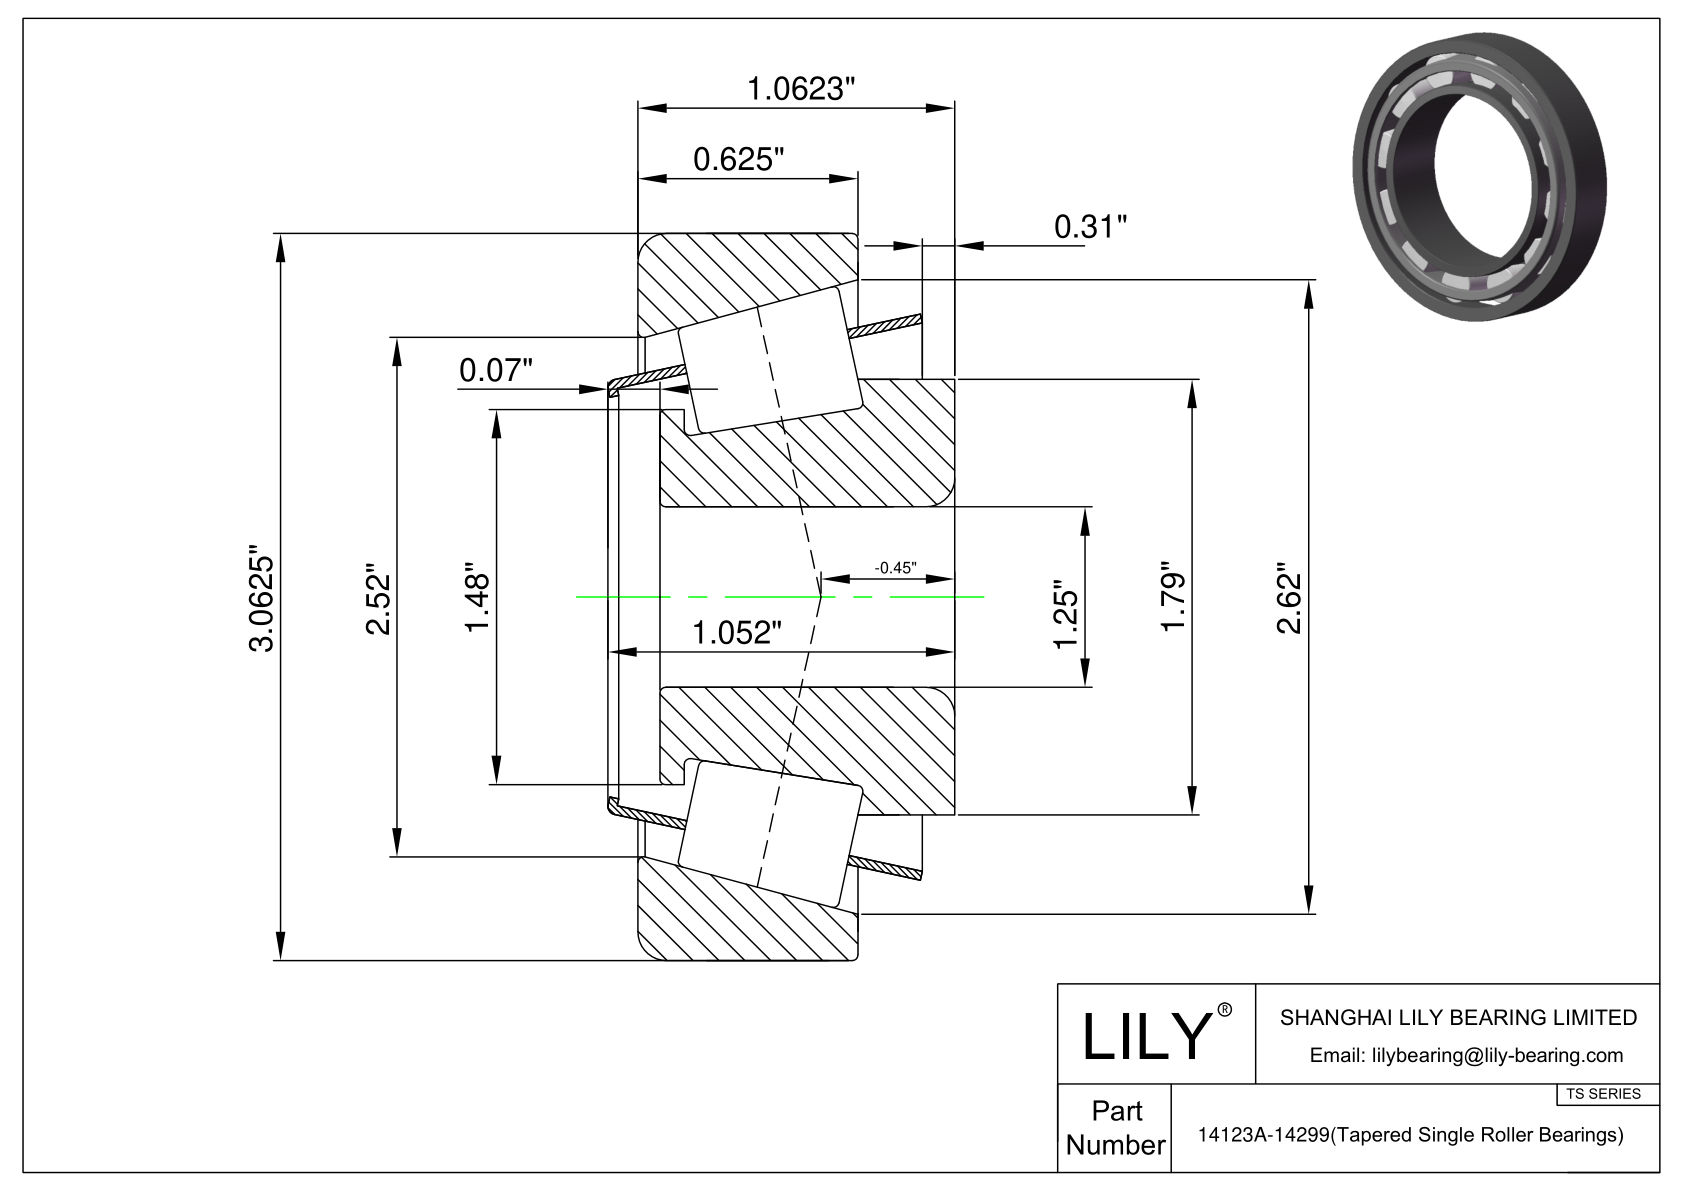 14123A-14299 TS (Tapered Single Roller Bearings) (Imperial) cad drawing